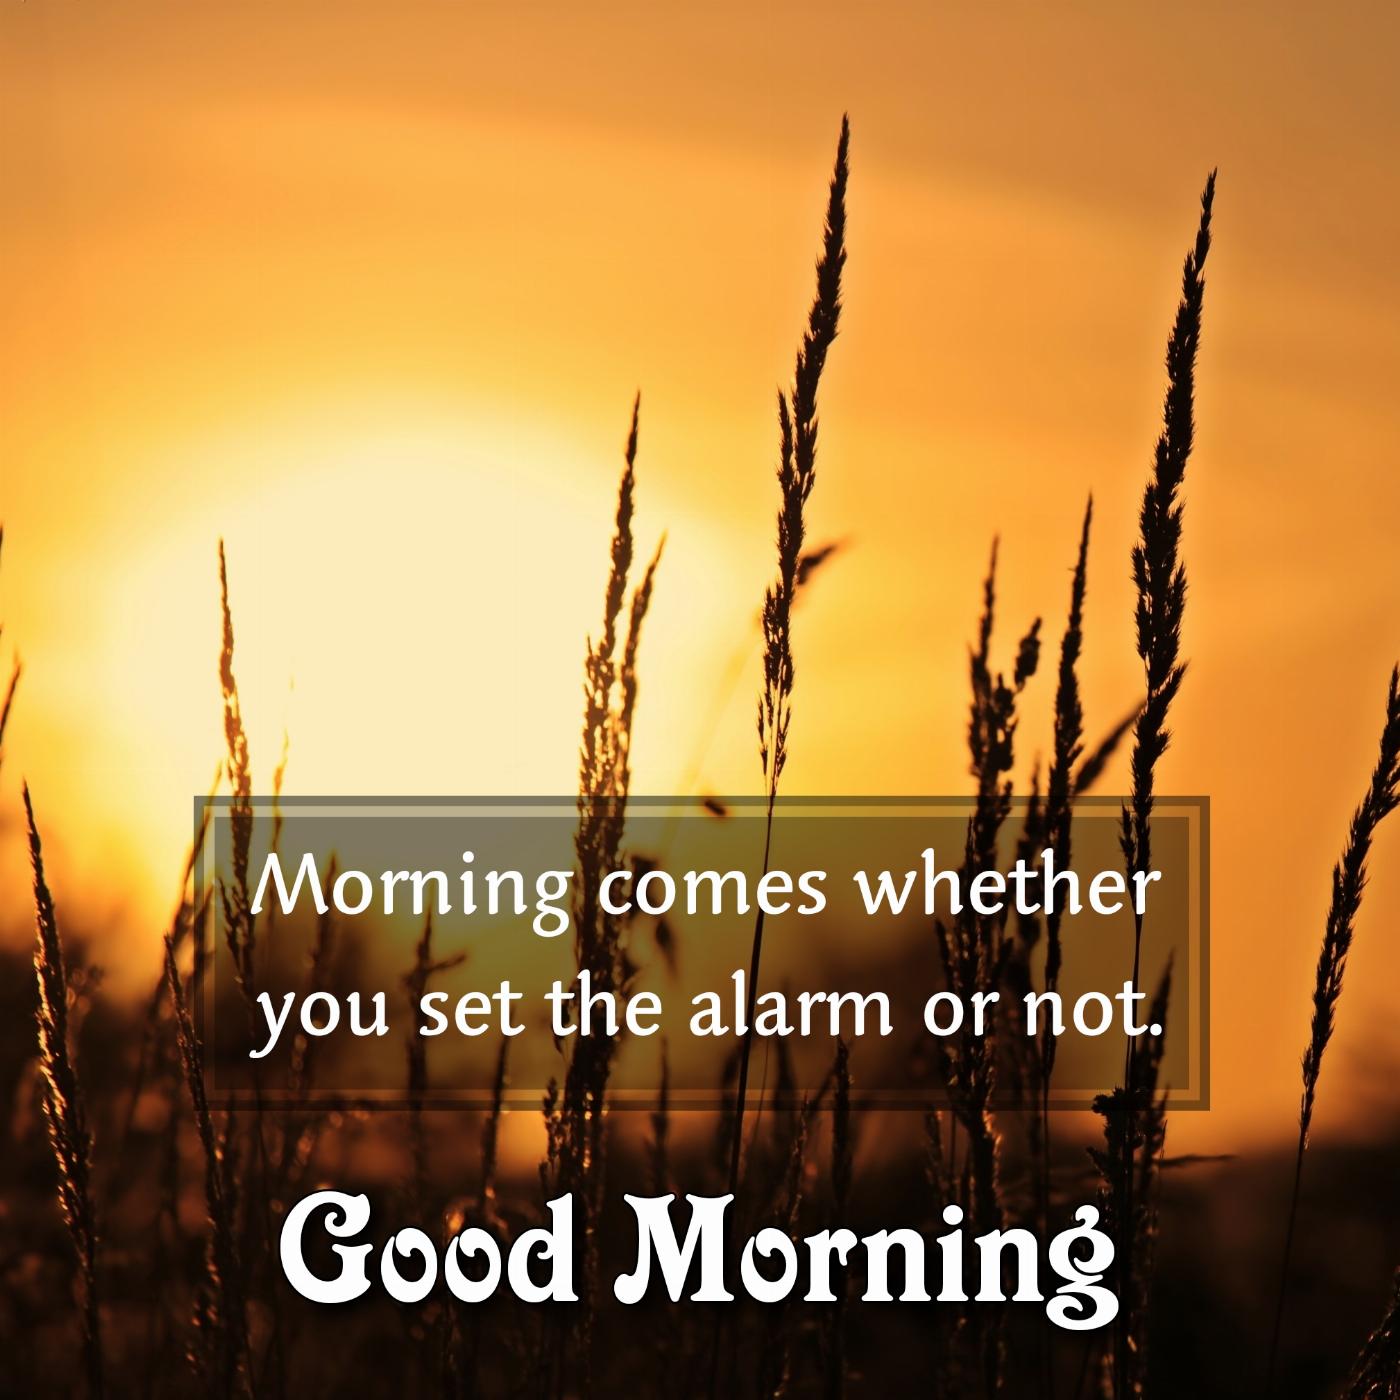 Morning comes whether you set the alarm or not